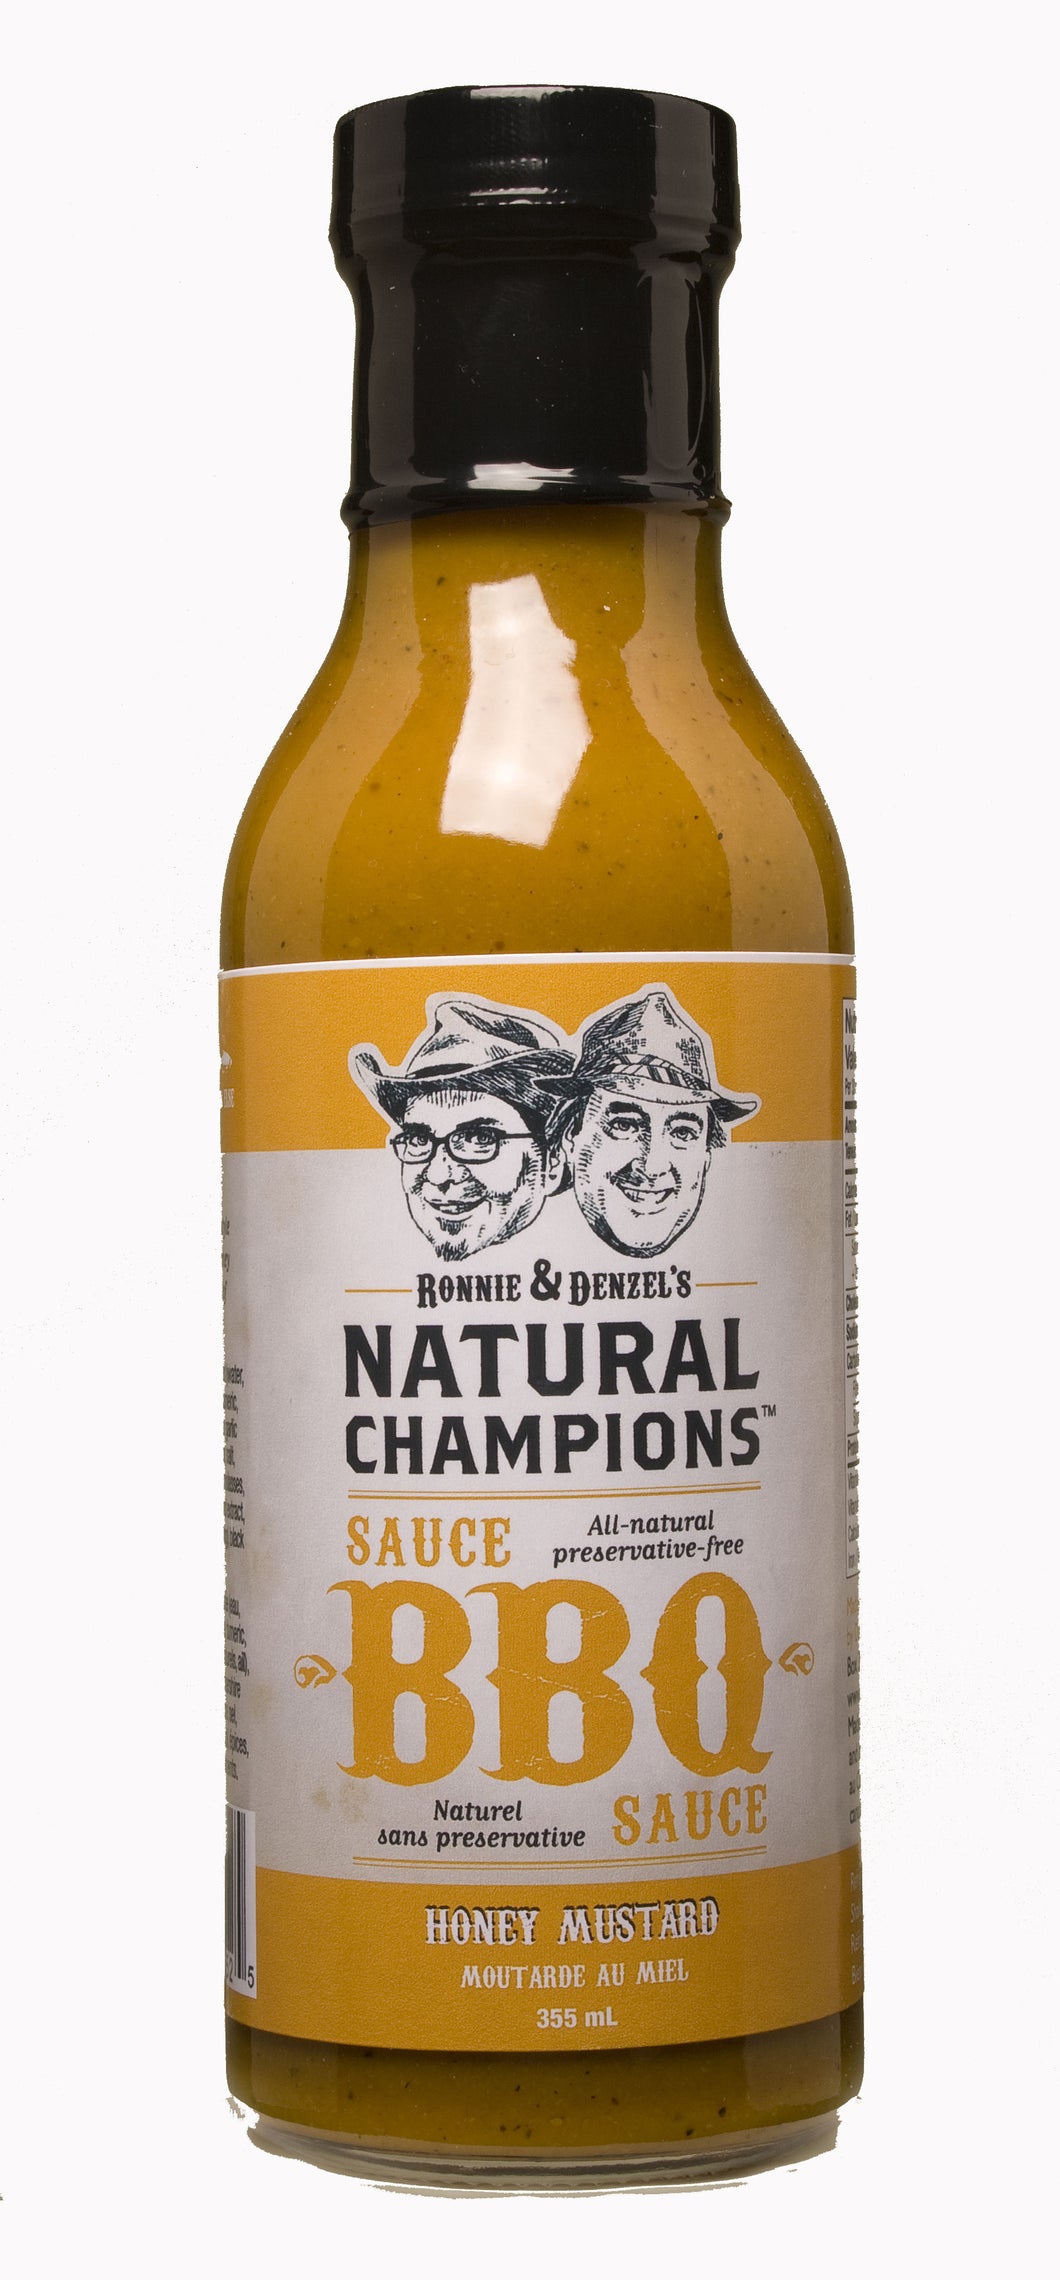 A 355ml bottle of Ronnie and Denzel's Natural Champions Honey Mustard BBQ Sauce.